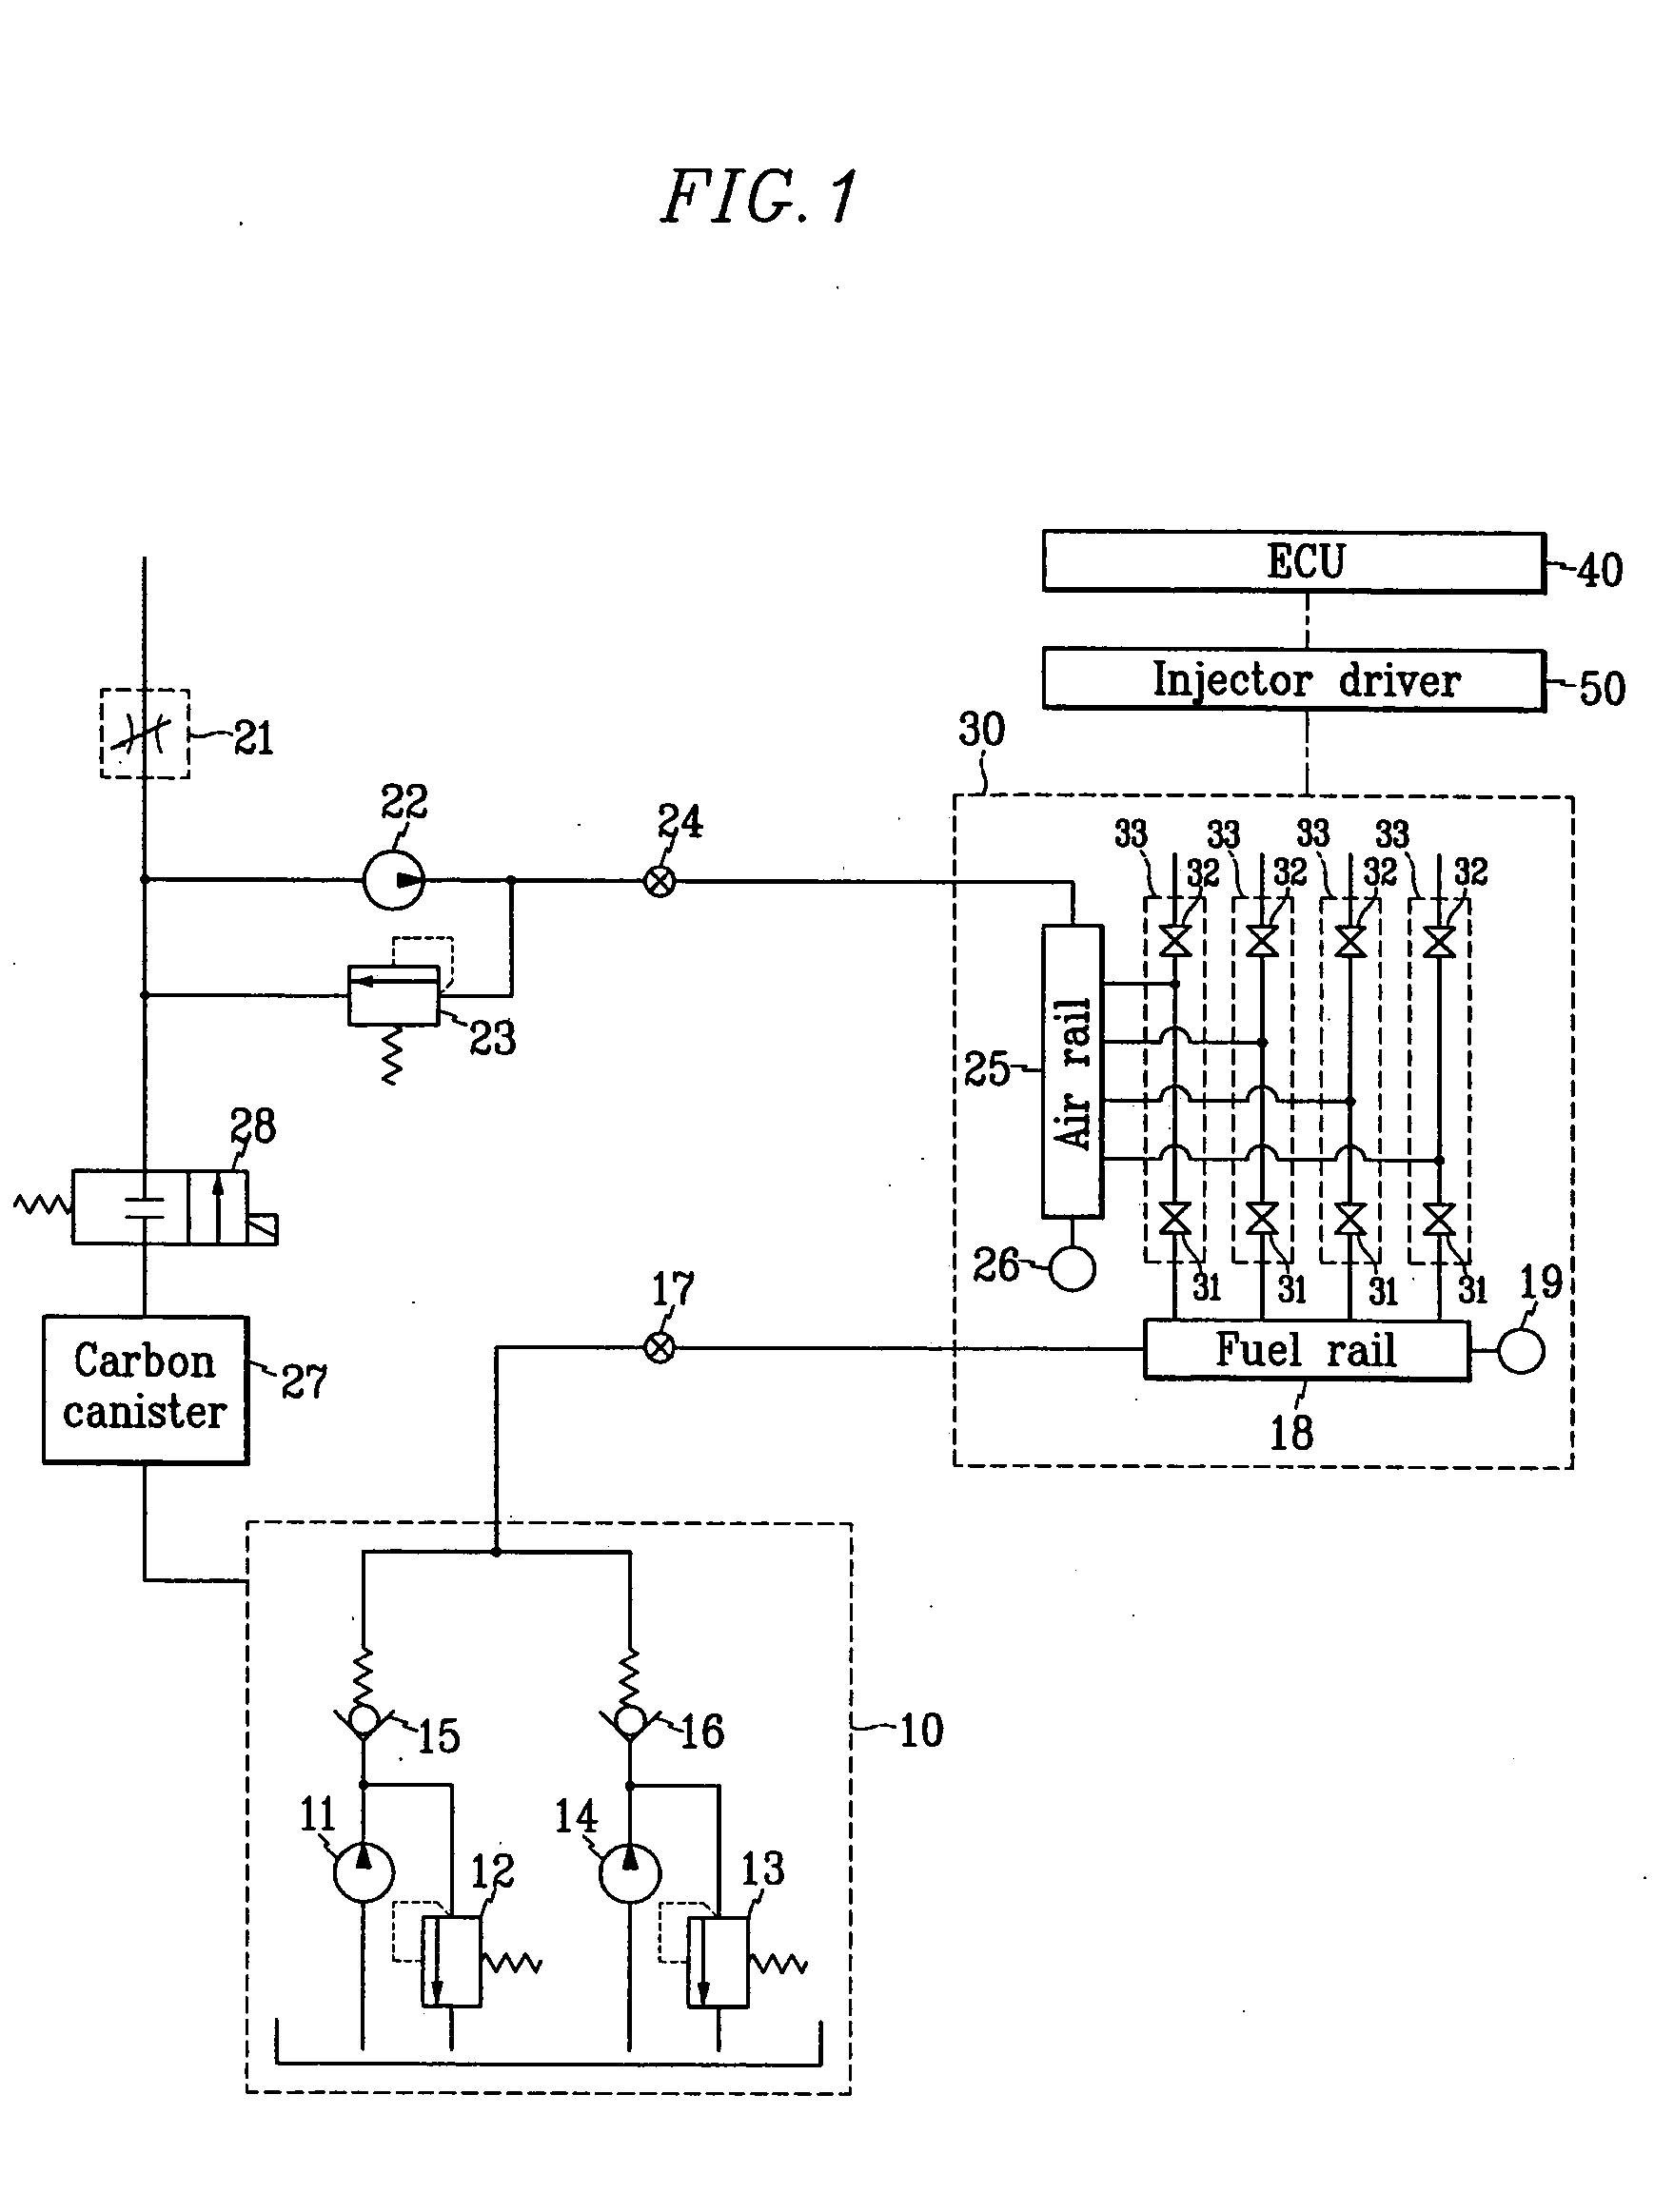 Gasoline direct injection system